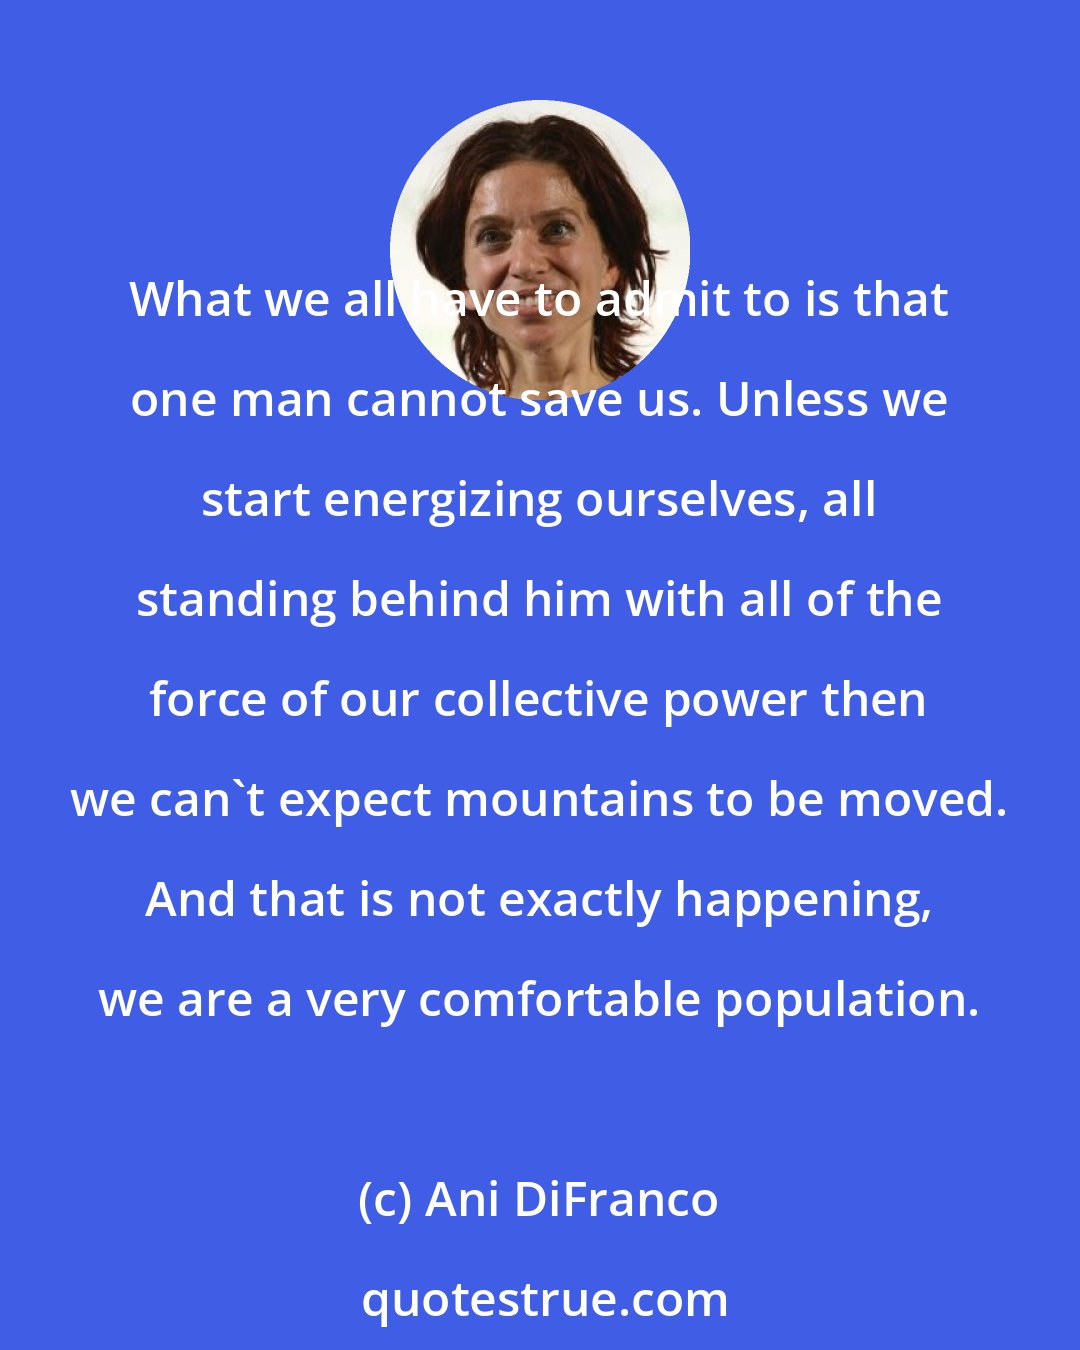 Ani DiFranco: What we all have to admit to is that one man cannot save us. Unless we start energizing ourselves, all standing behind him with all of the force of our collective power then we can't expect mountains to be moved. And that is not exactly happening, we are a very comfortable population.